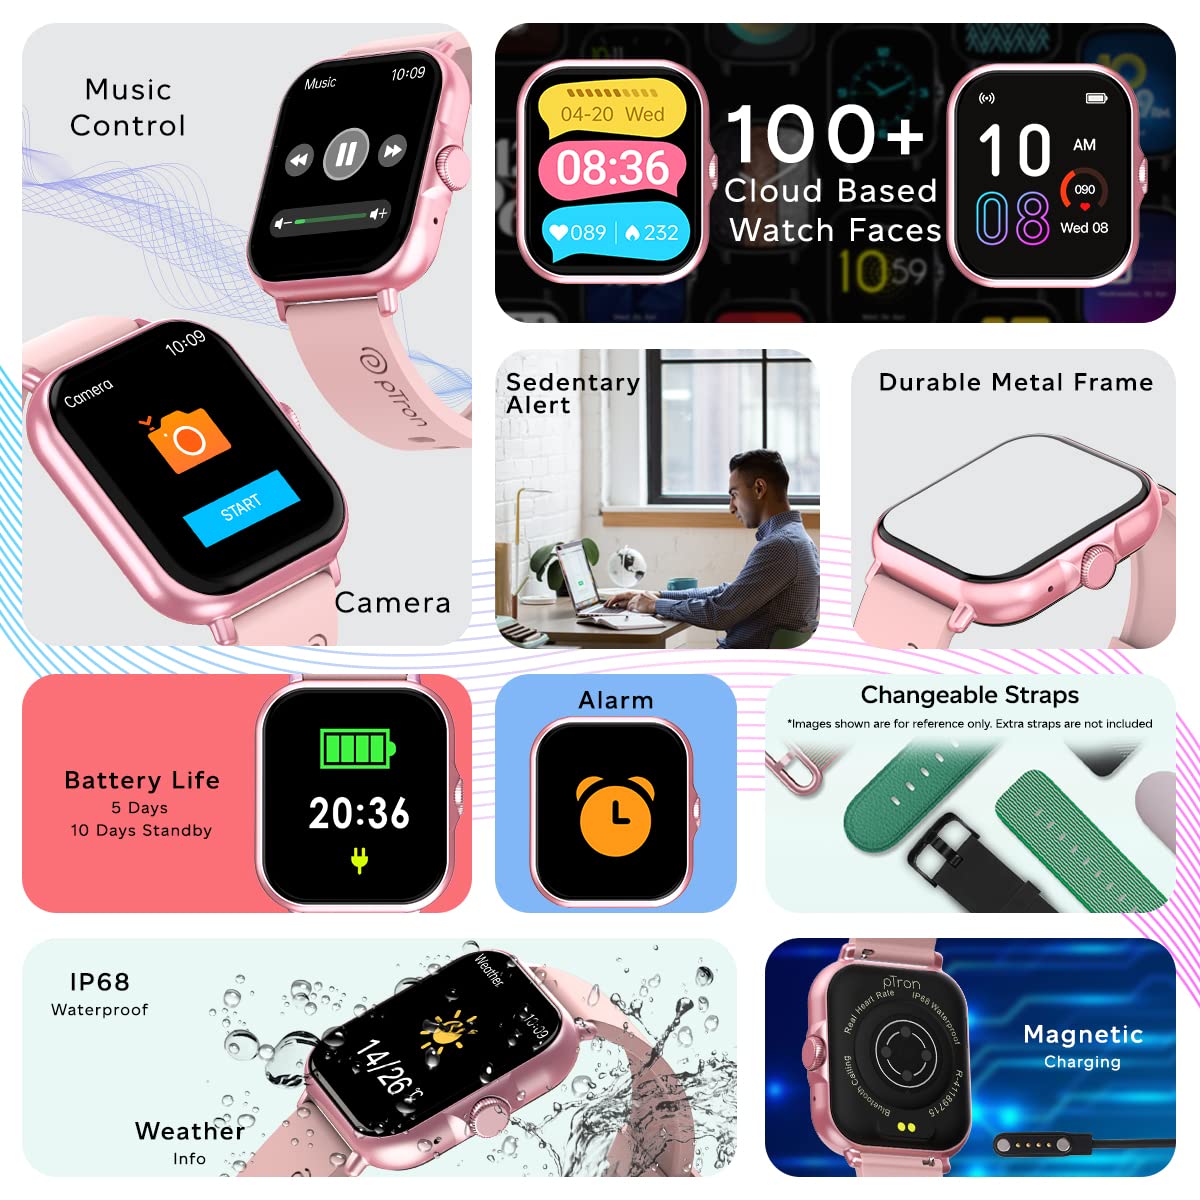 PTron Force X12N 1.85" Full Touch HD Display Bluetooth Calling Smartwatch, Functional Crown, 580 NITS Brightness, HR, SpO2, Watch Faces, Inbuilt Games, 5 Days Battery Life & IP68 Waterproof (Pink)